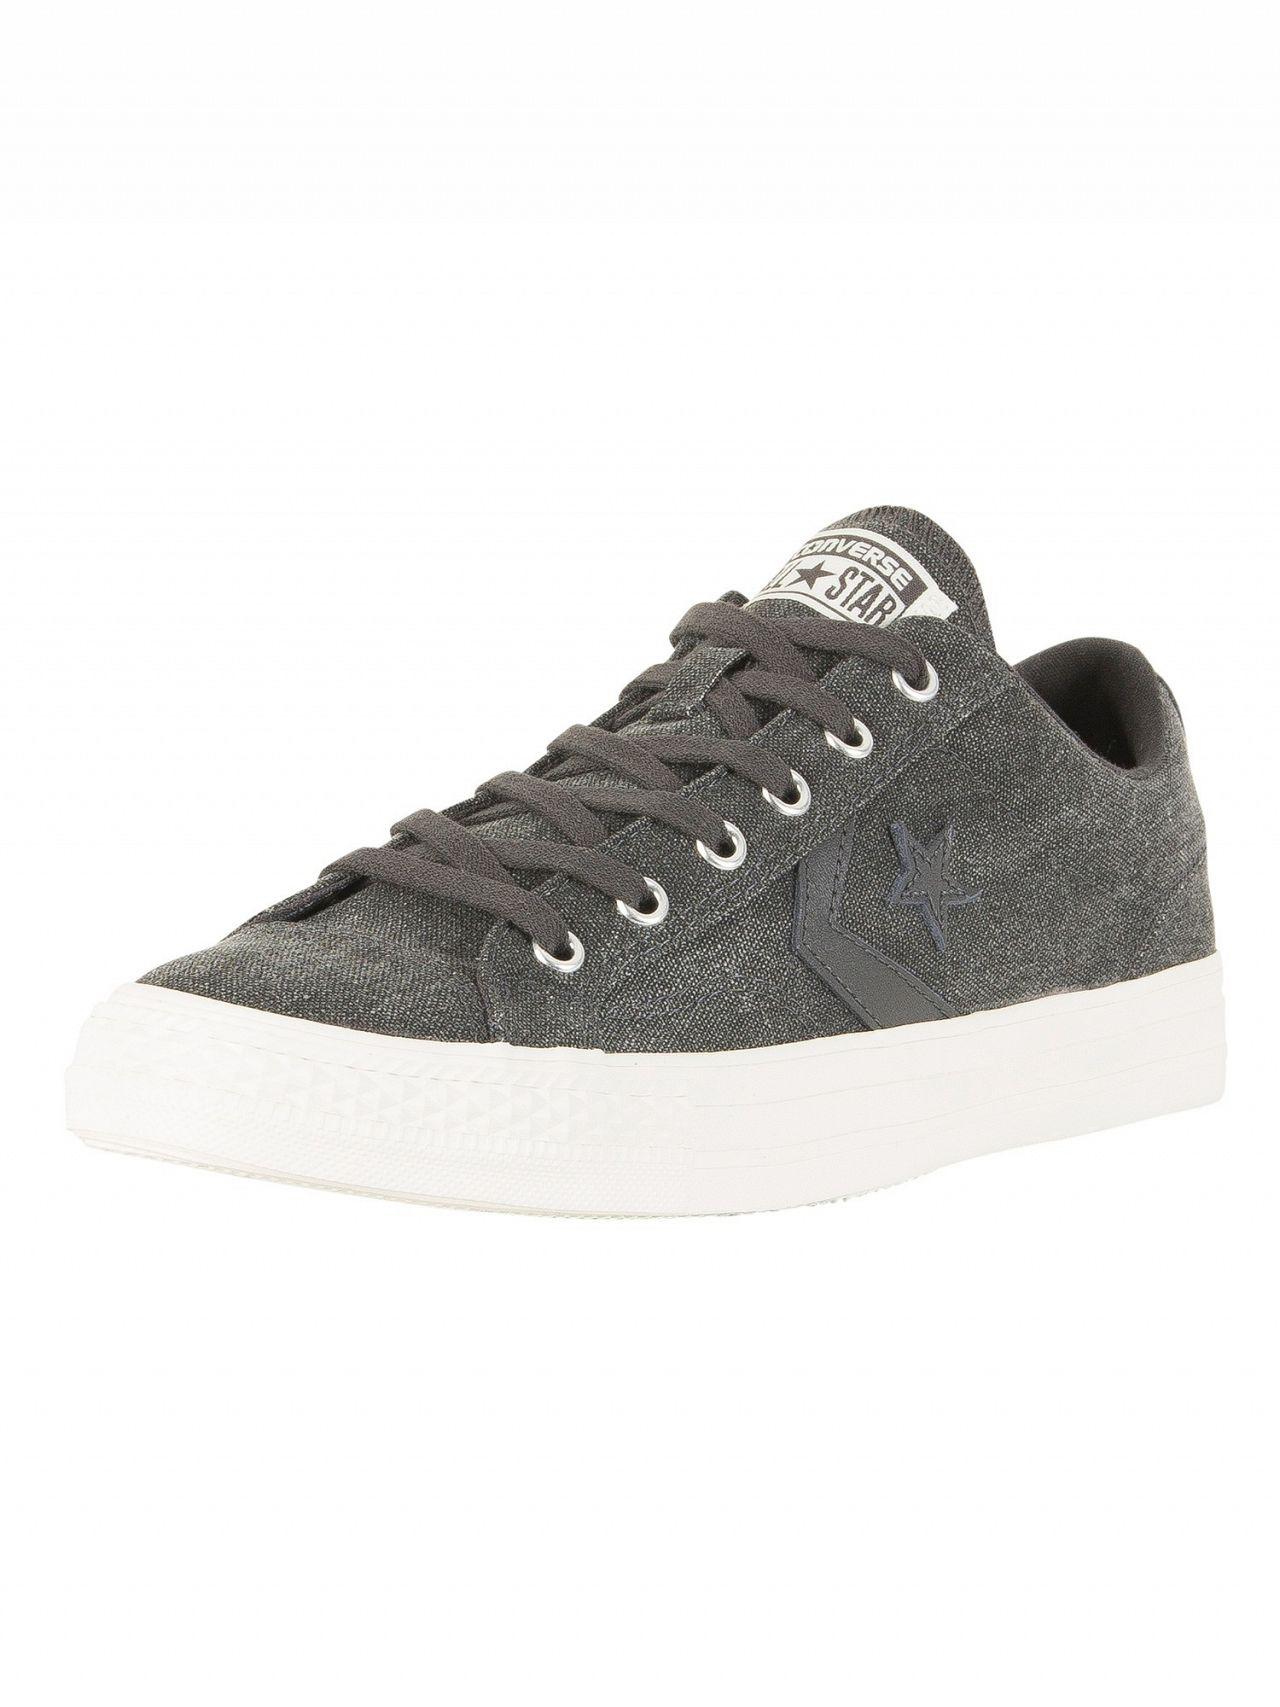 Converse Lace Almost Black/almost Black Star Player Ox Trainers for Men -  Lyst